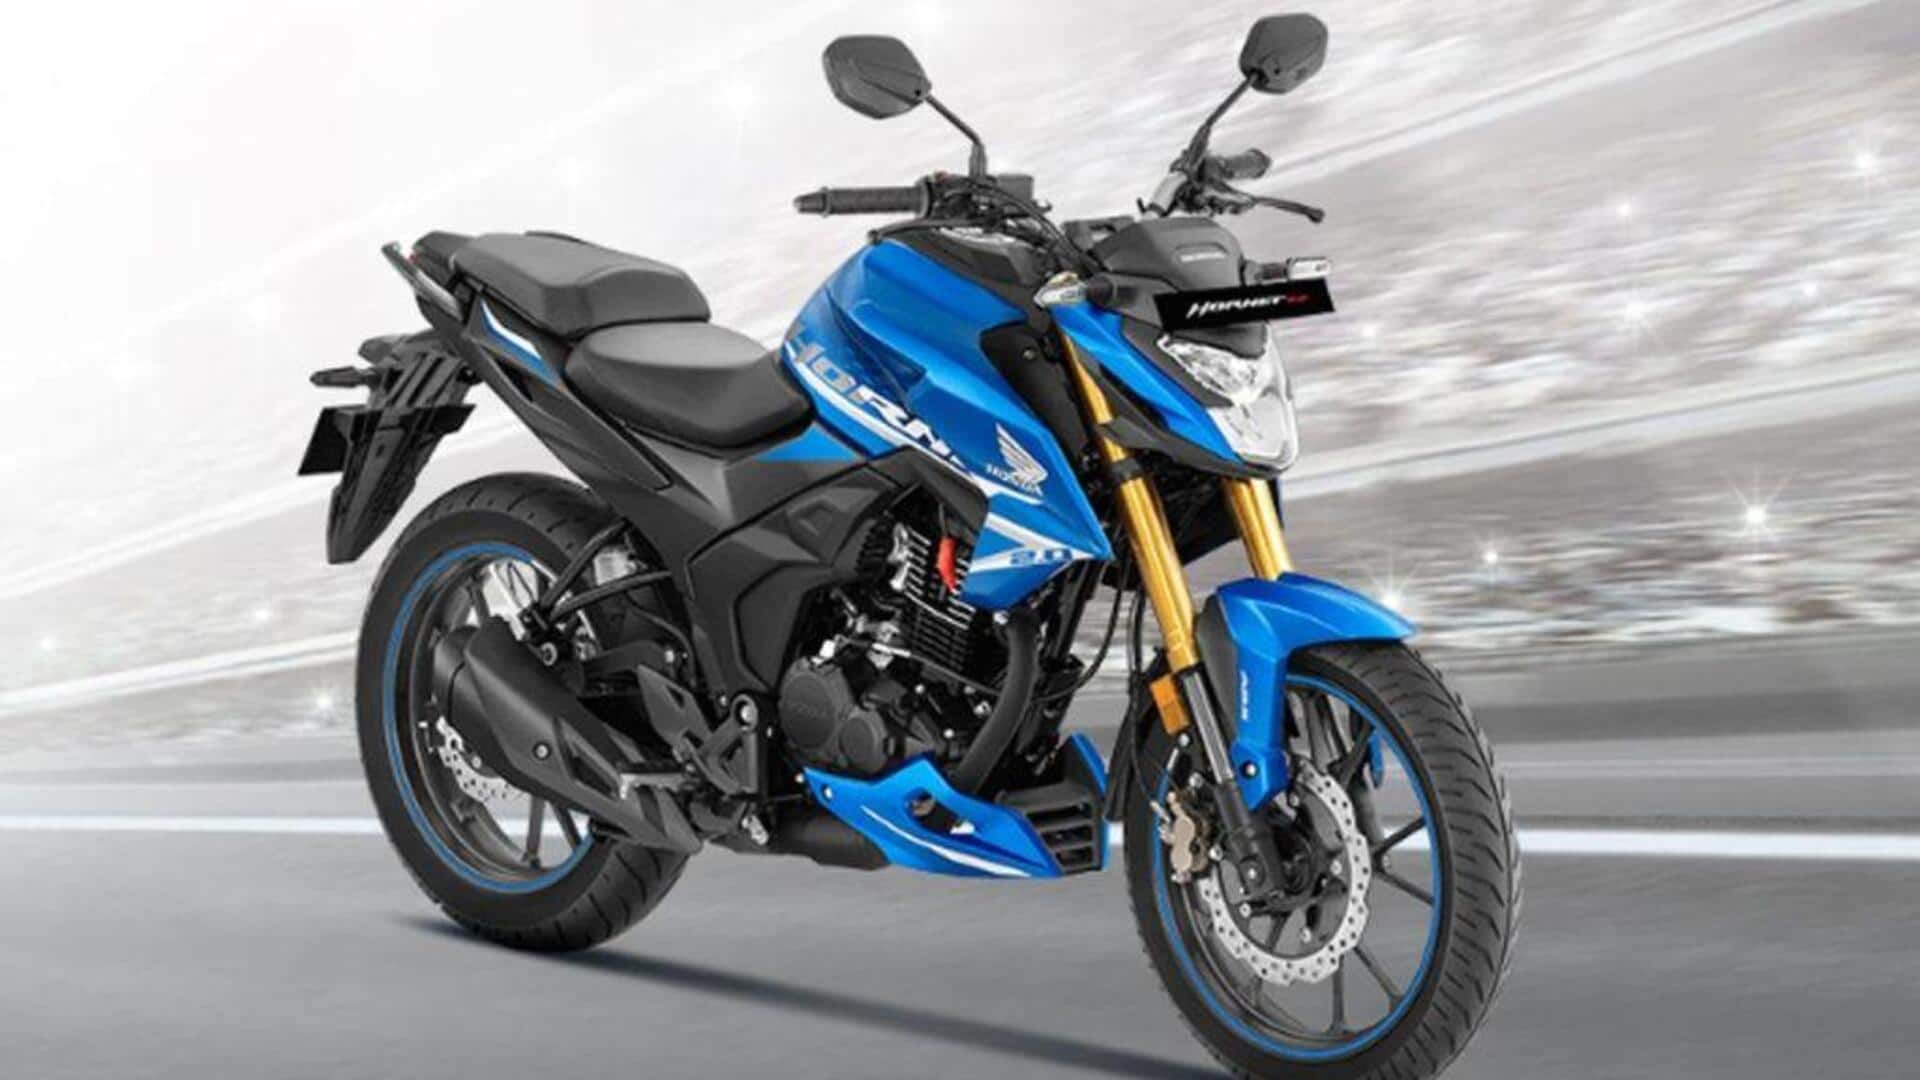 Honda Hornet 2.0, with OBD2-compliant engine, launched at Rs. 1.39L